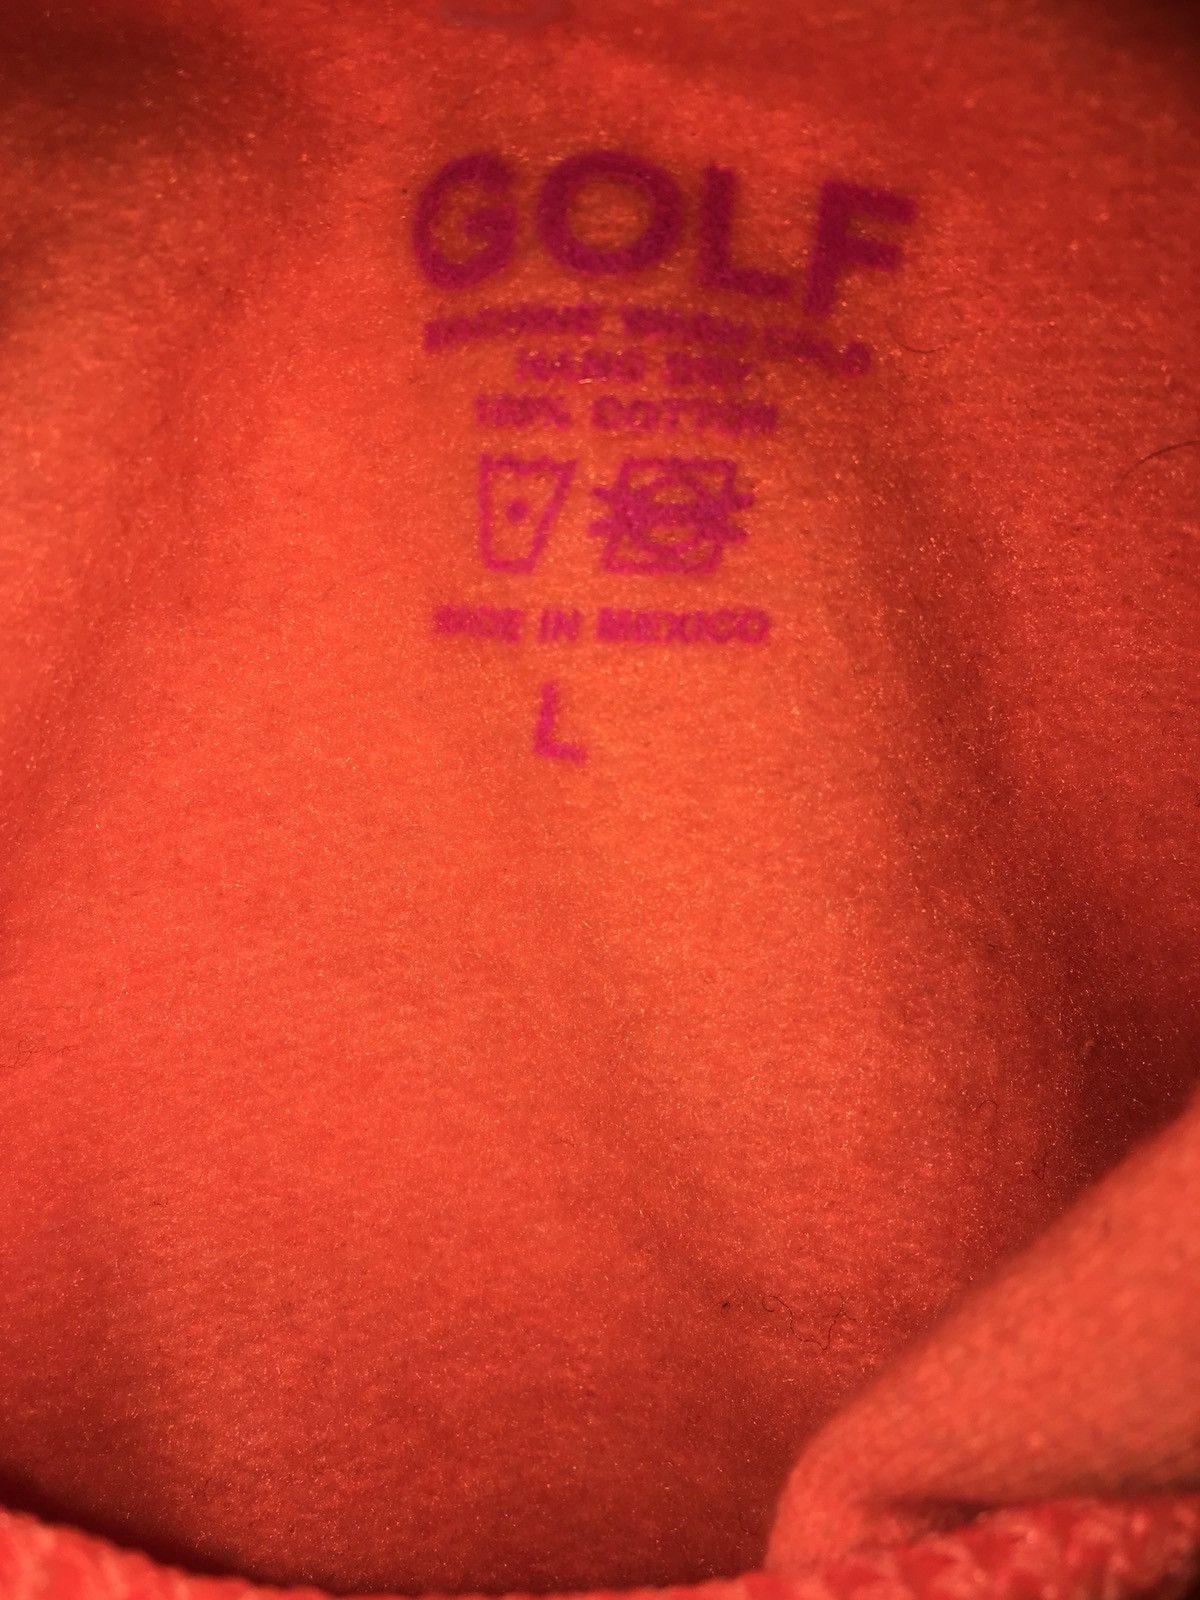 Golf Wang Save The Bees Hoodie Size US L / EU 52-54 / 3 - 7 Preview